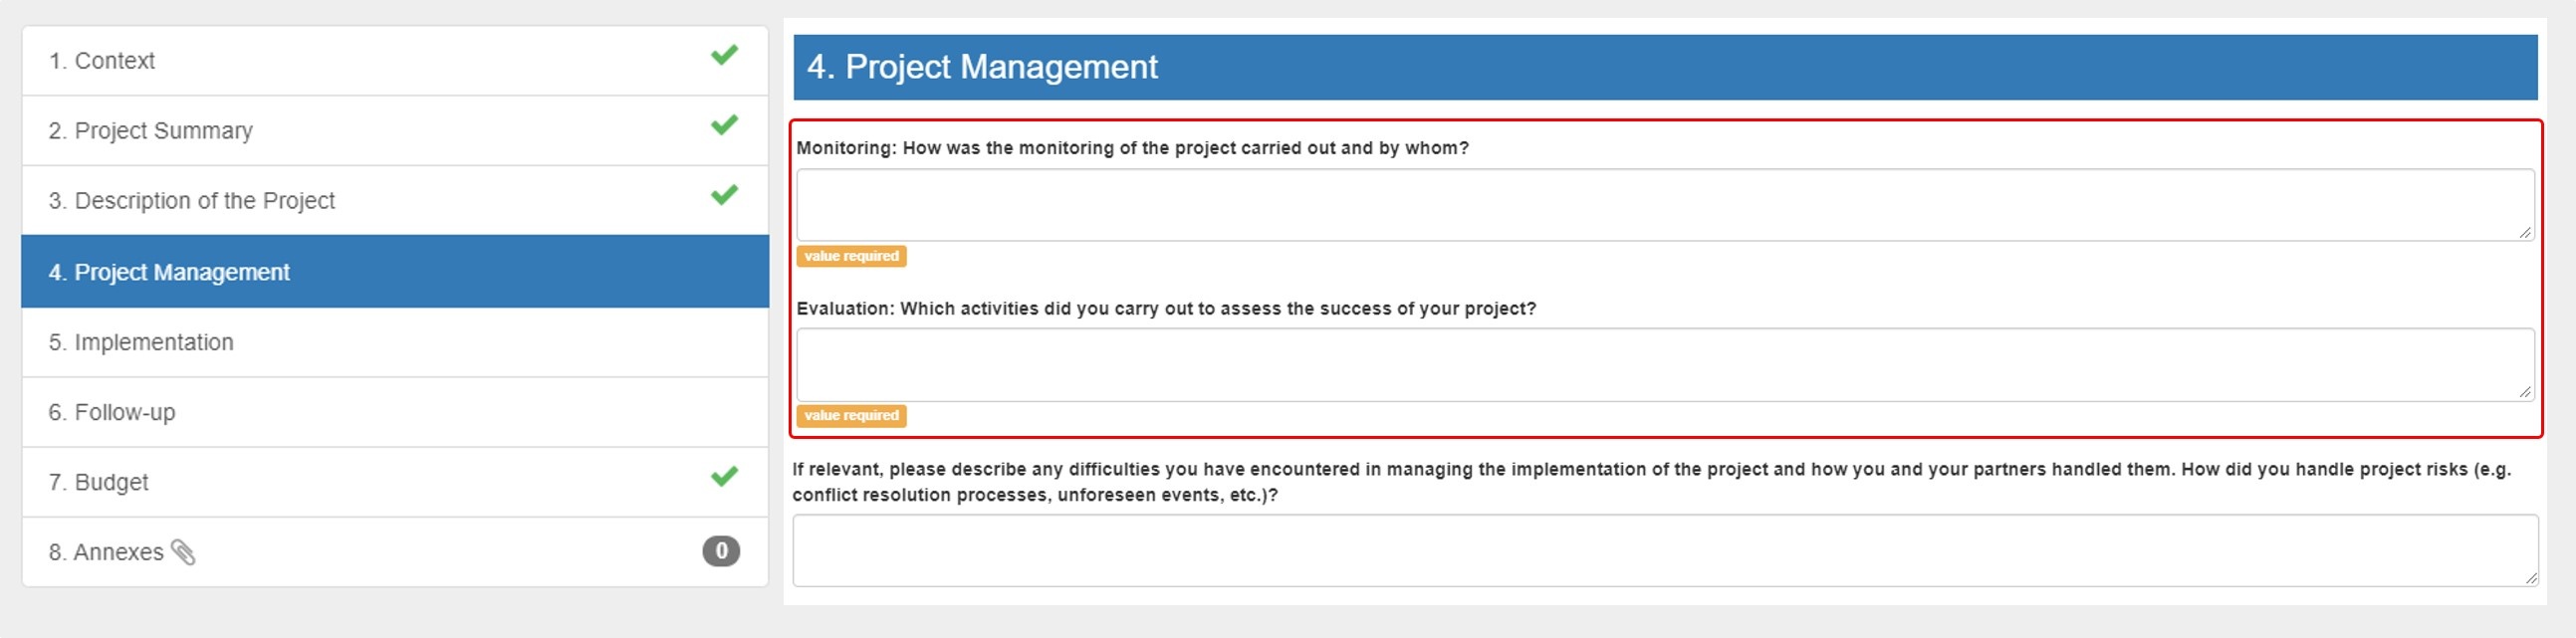 Fill in Project Management